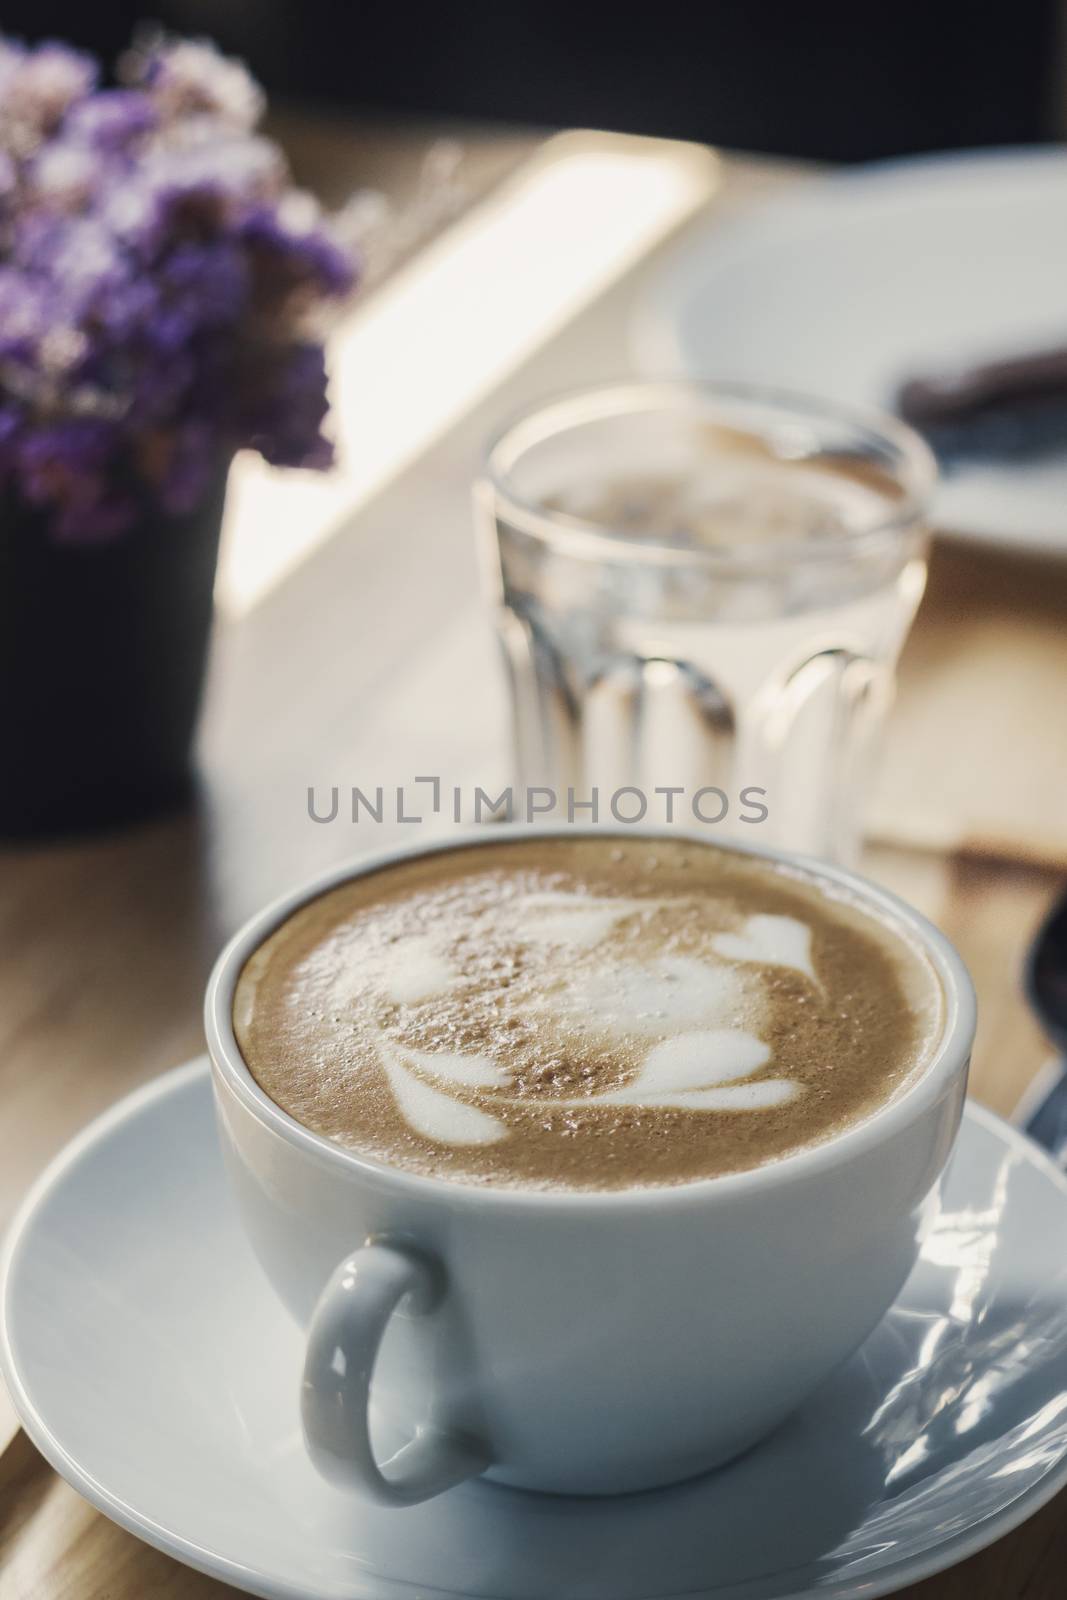 Soft focus on latte coffee cup, coffee for background - vintage effect process picture